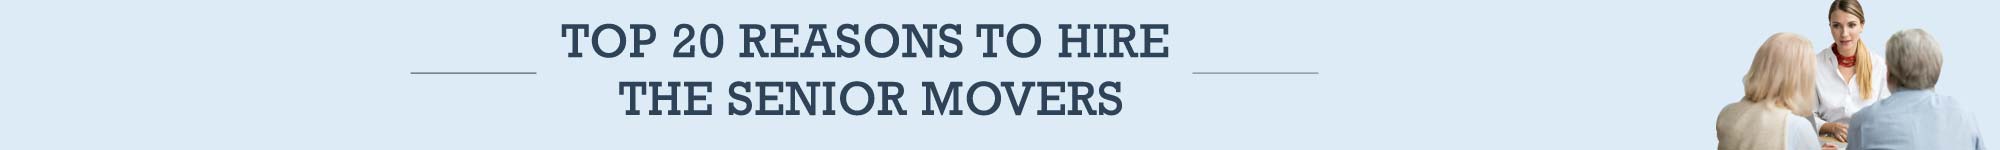 Top 20 Reasons to Hire The Senior Movers